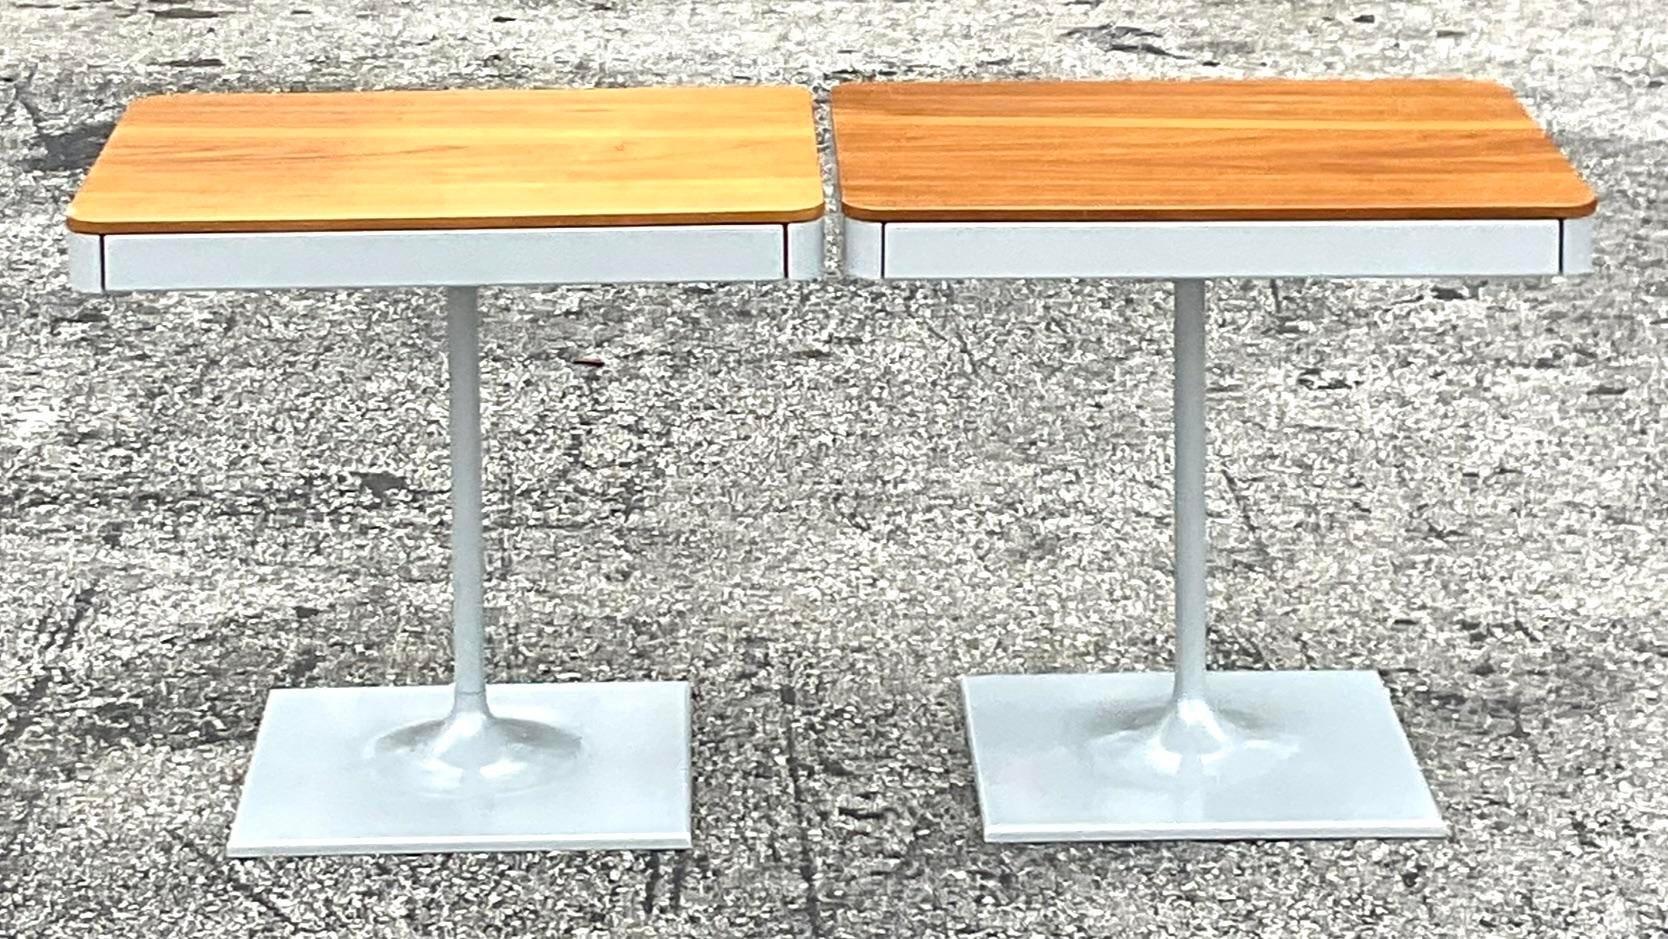 American Vintage Contemporary Min Pedestal Nightstands - a Pair For Sale